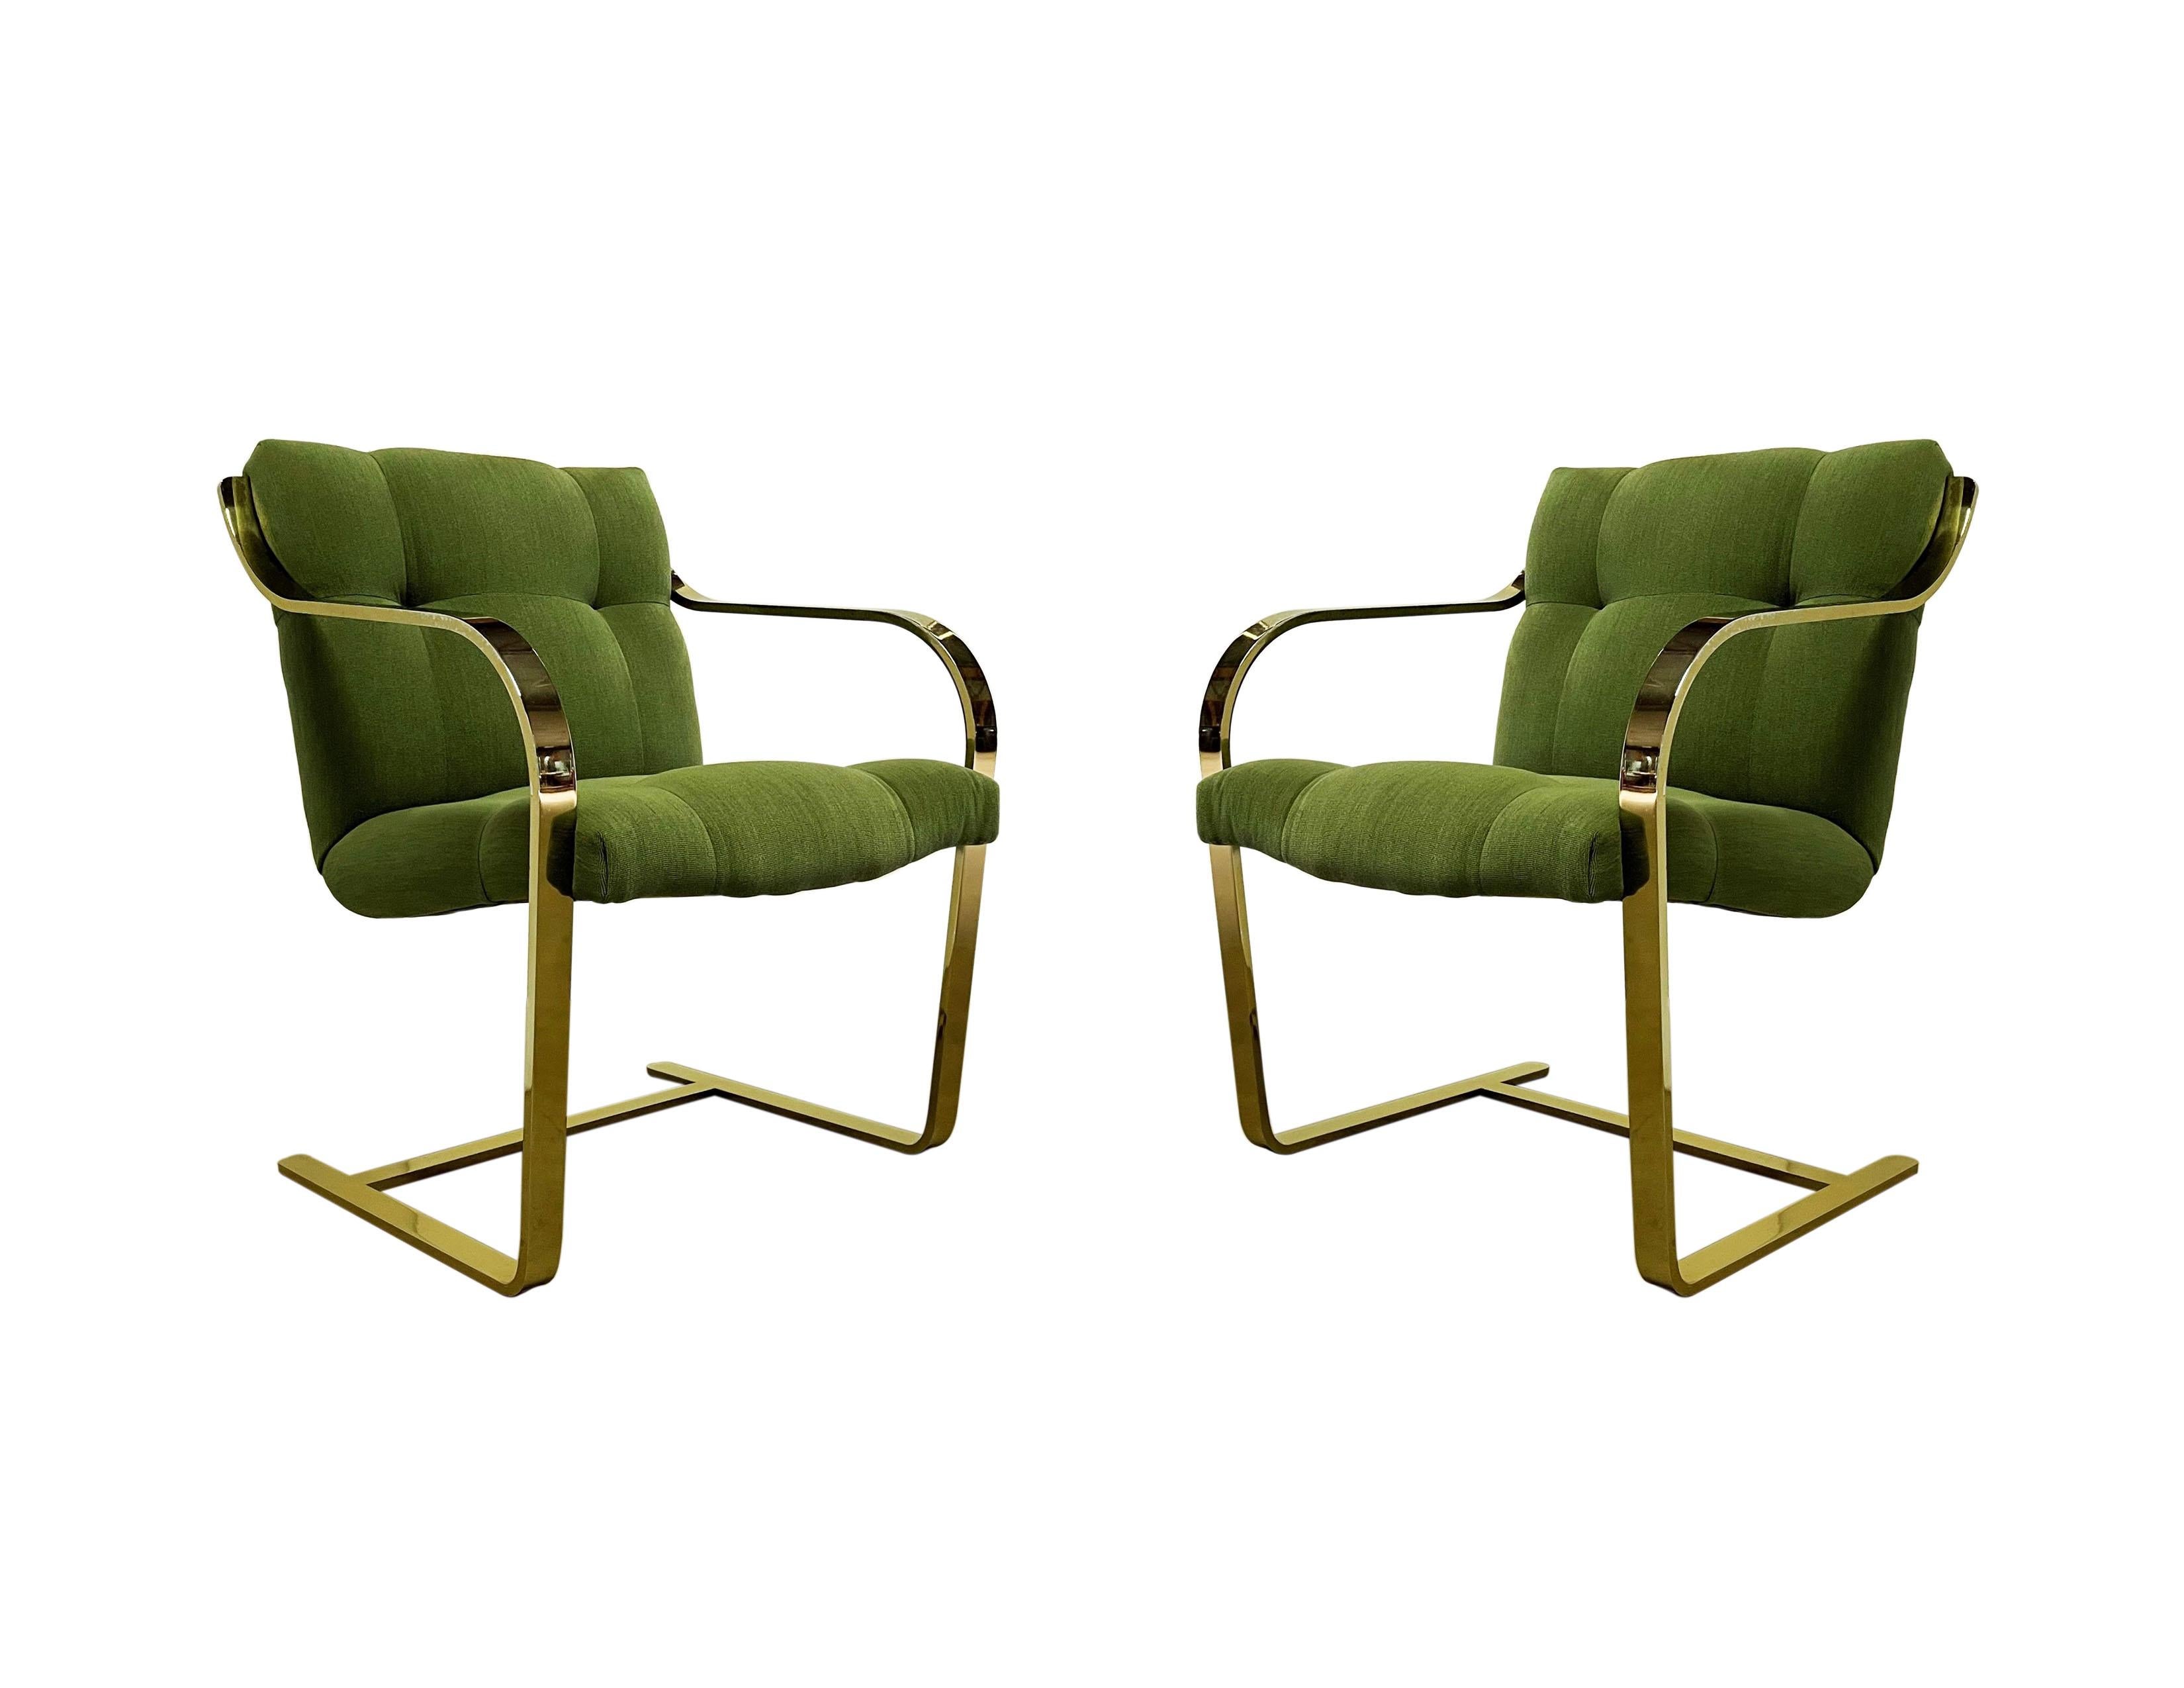 Inspired by the iconic Brno chairs, these hefty flat bar cantilevered chairs by Brueton. Distinguished by its flowing lines, featuring stainless steel frames in a rare brass plated finish. Welded, ground and polished into a seamless unit that